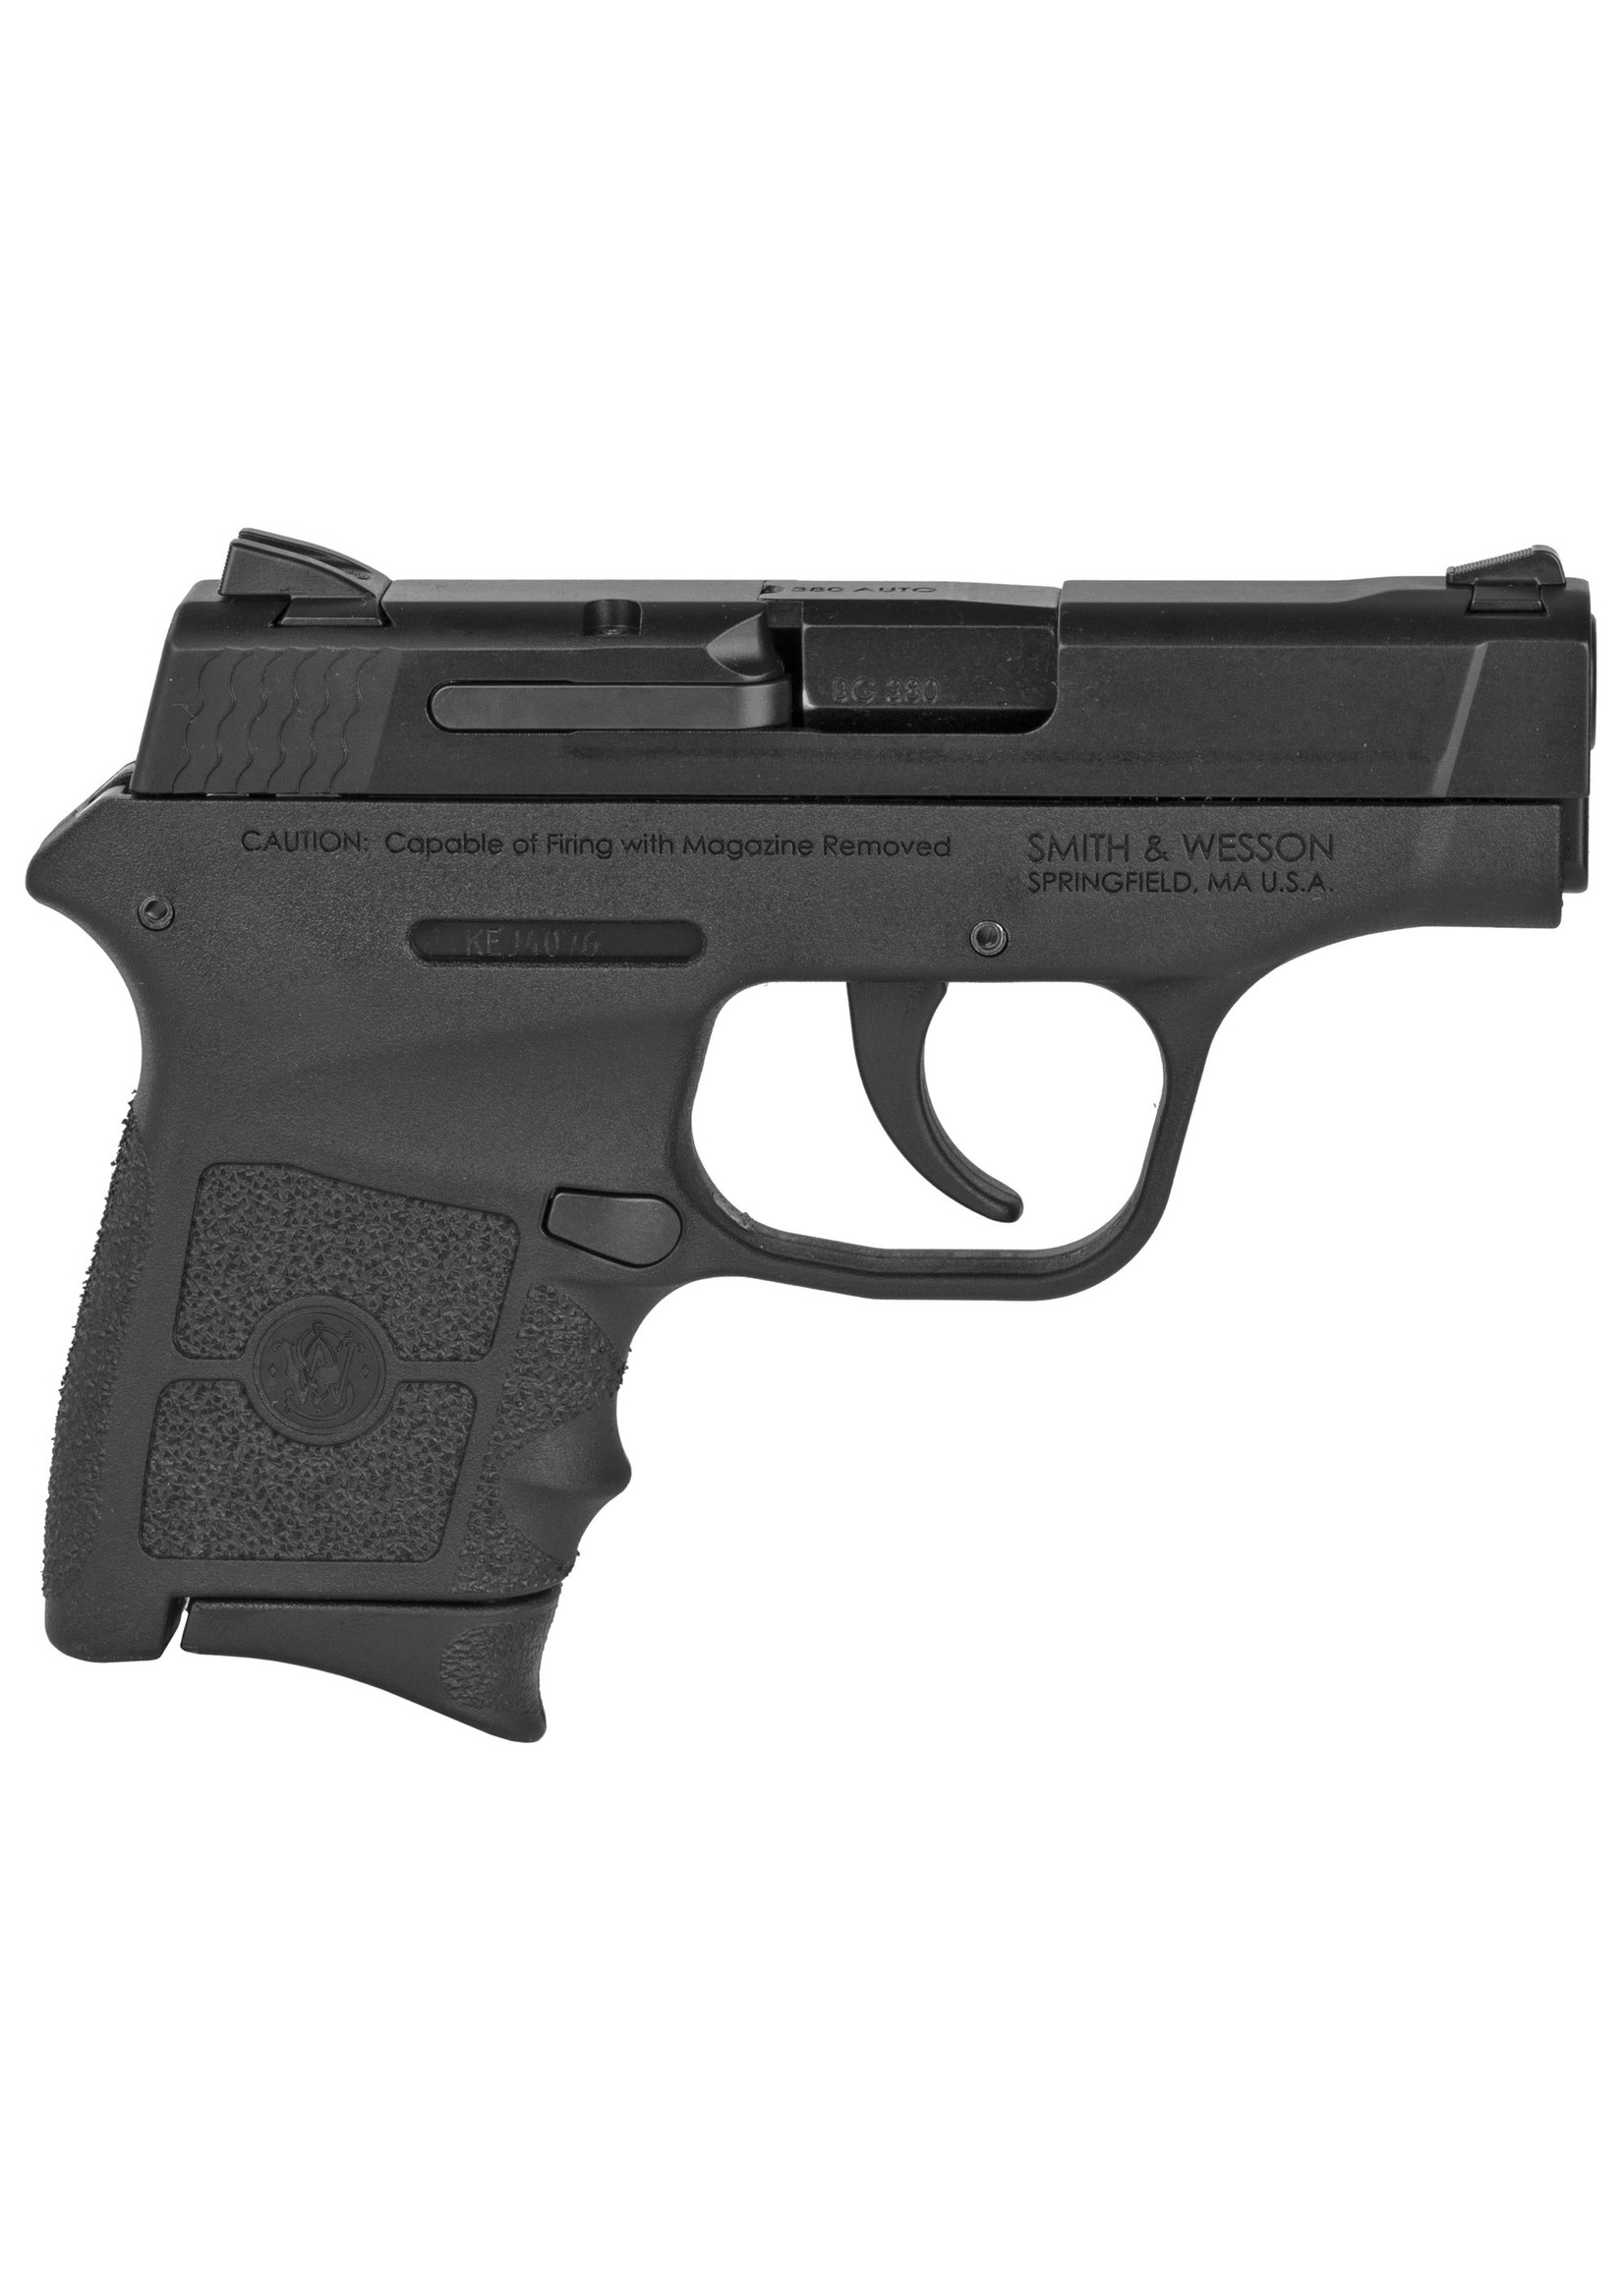 Smith and Wesson (S&W) Smith & Wesson, M&P Bodyguard, Double Action Only, Semi-Automatic, Polymer Frame Pistol, Sub-Compact, 380ACP, 2.75" Barrel, Armornite Finish, Black, Fixed Sights, 6 Round, 2 Magazines